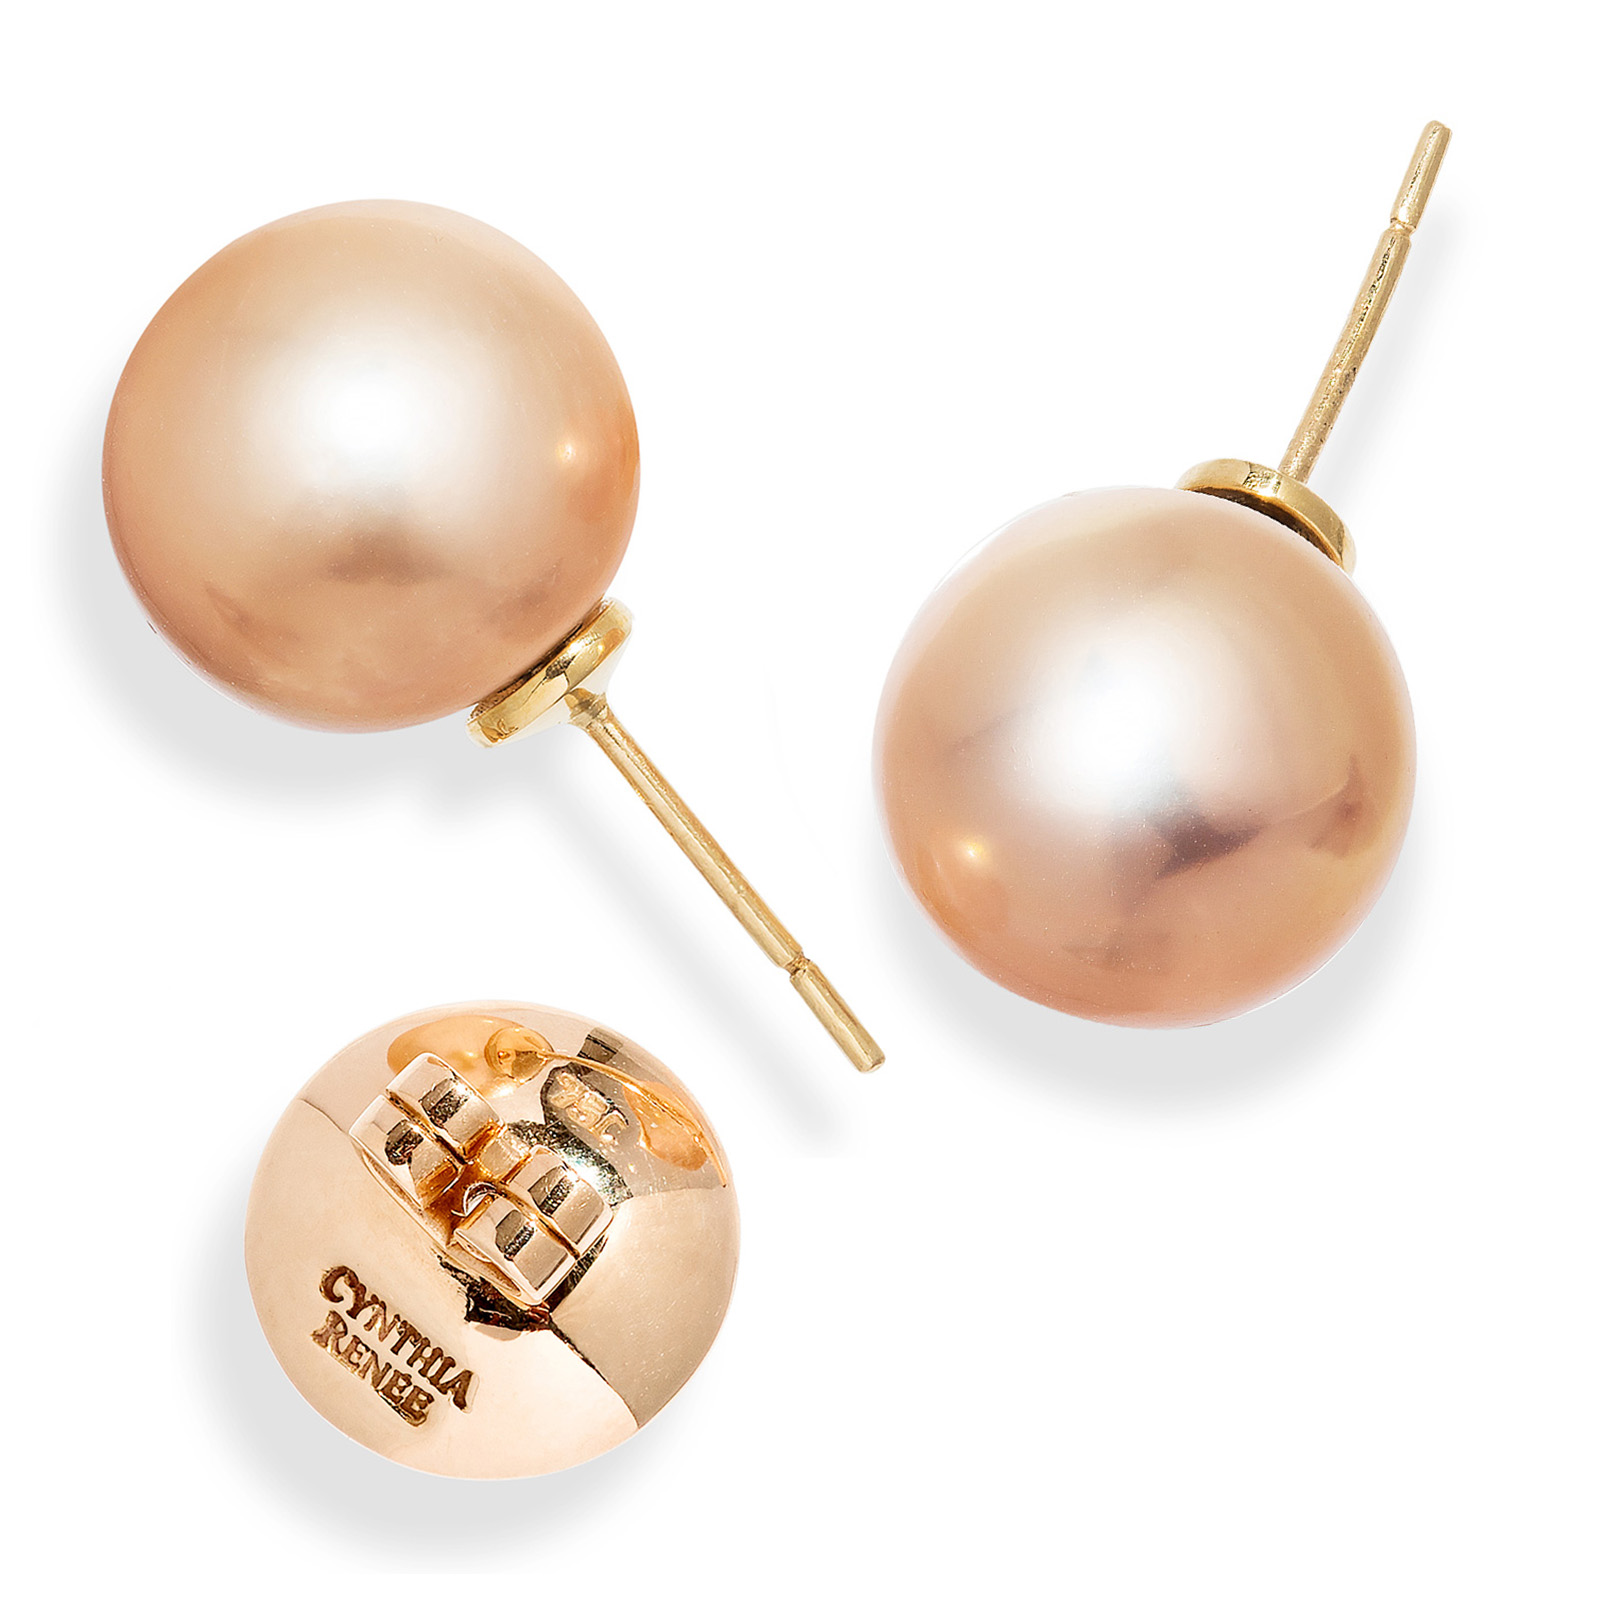 Pair of Pink-Peach Freshwater Kasumiga Pearl earrings, 12.5mm x 13mm on 18 karat yellow gold removable 